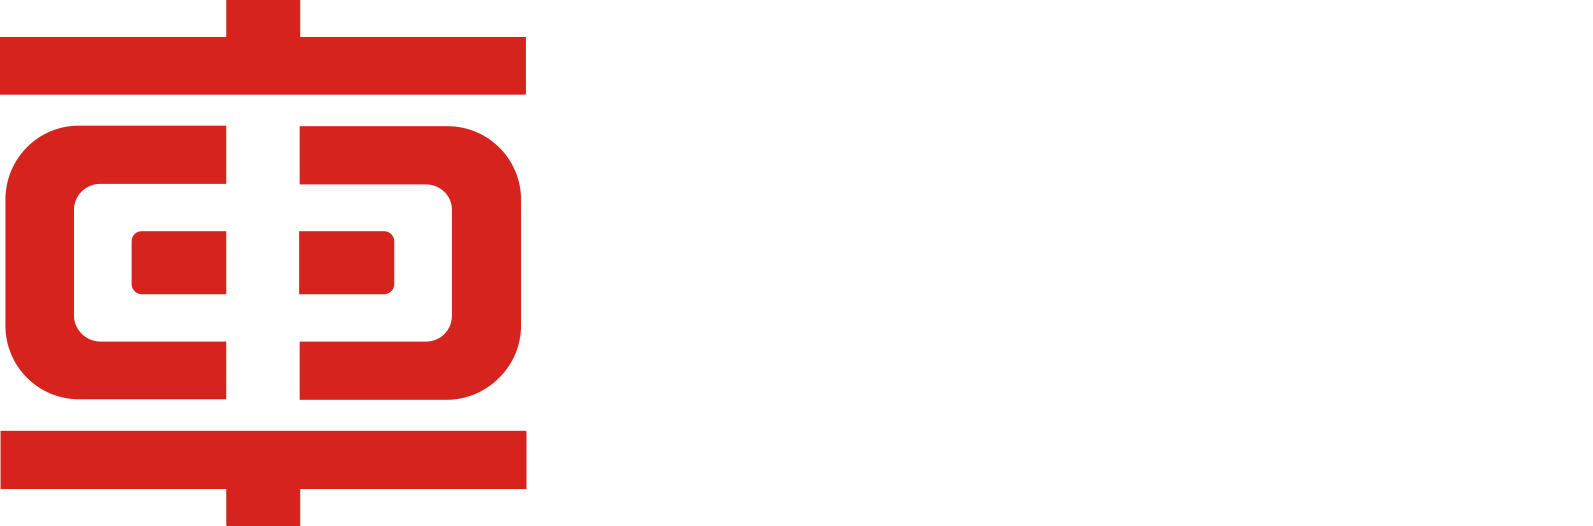 Zhuzhou CRRC Times Electric logo large for dark backgrounds (transparent PNG)